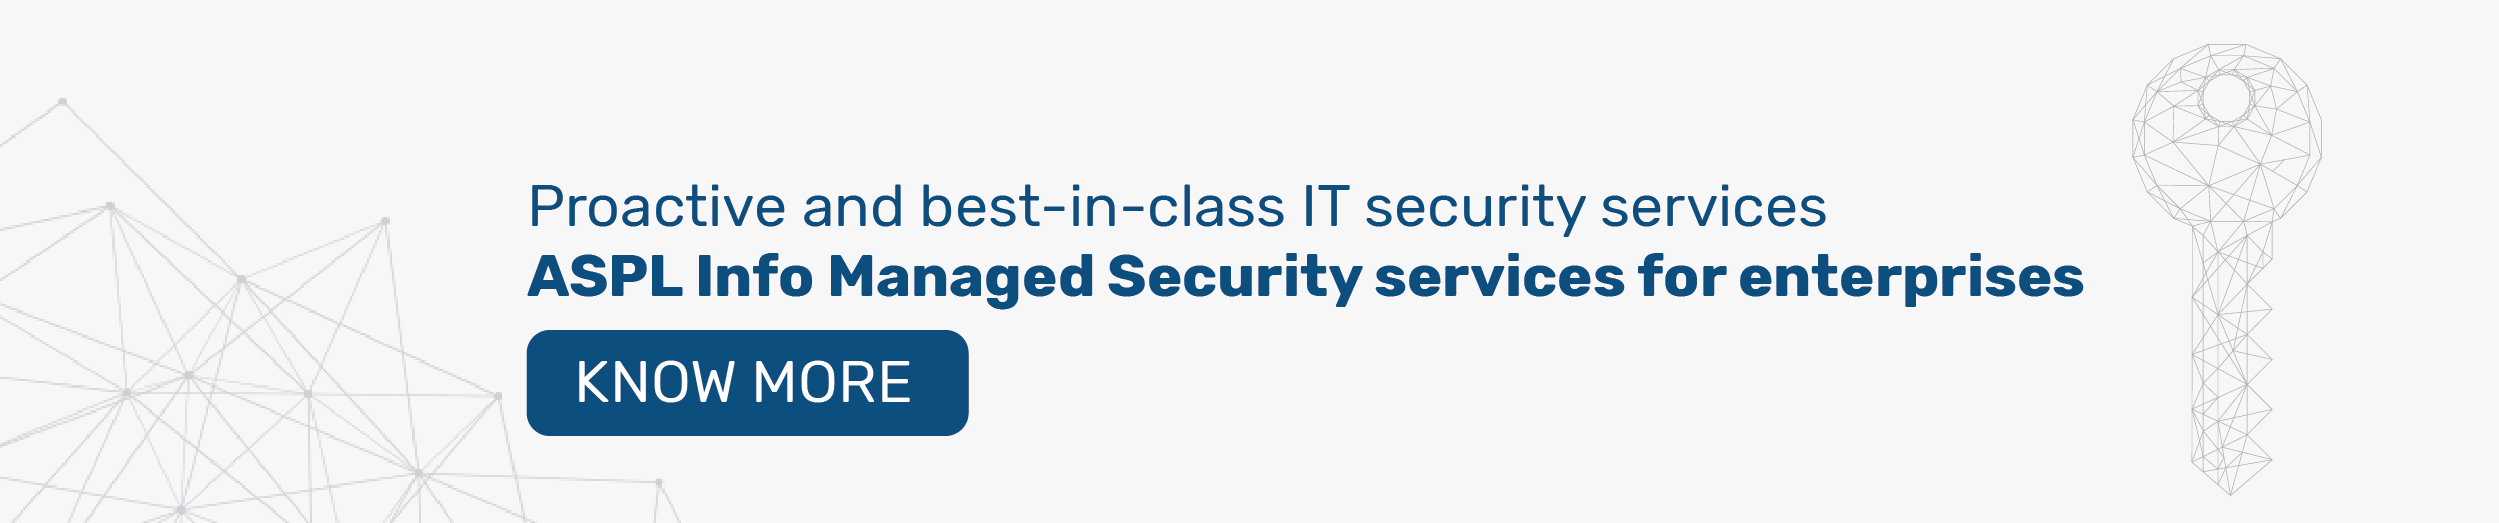 IT-security-services